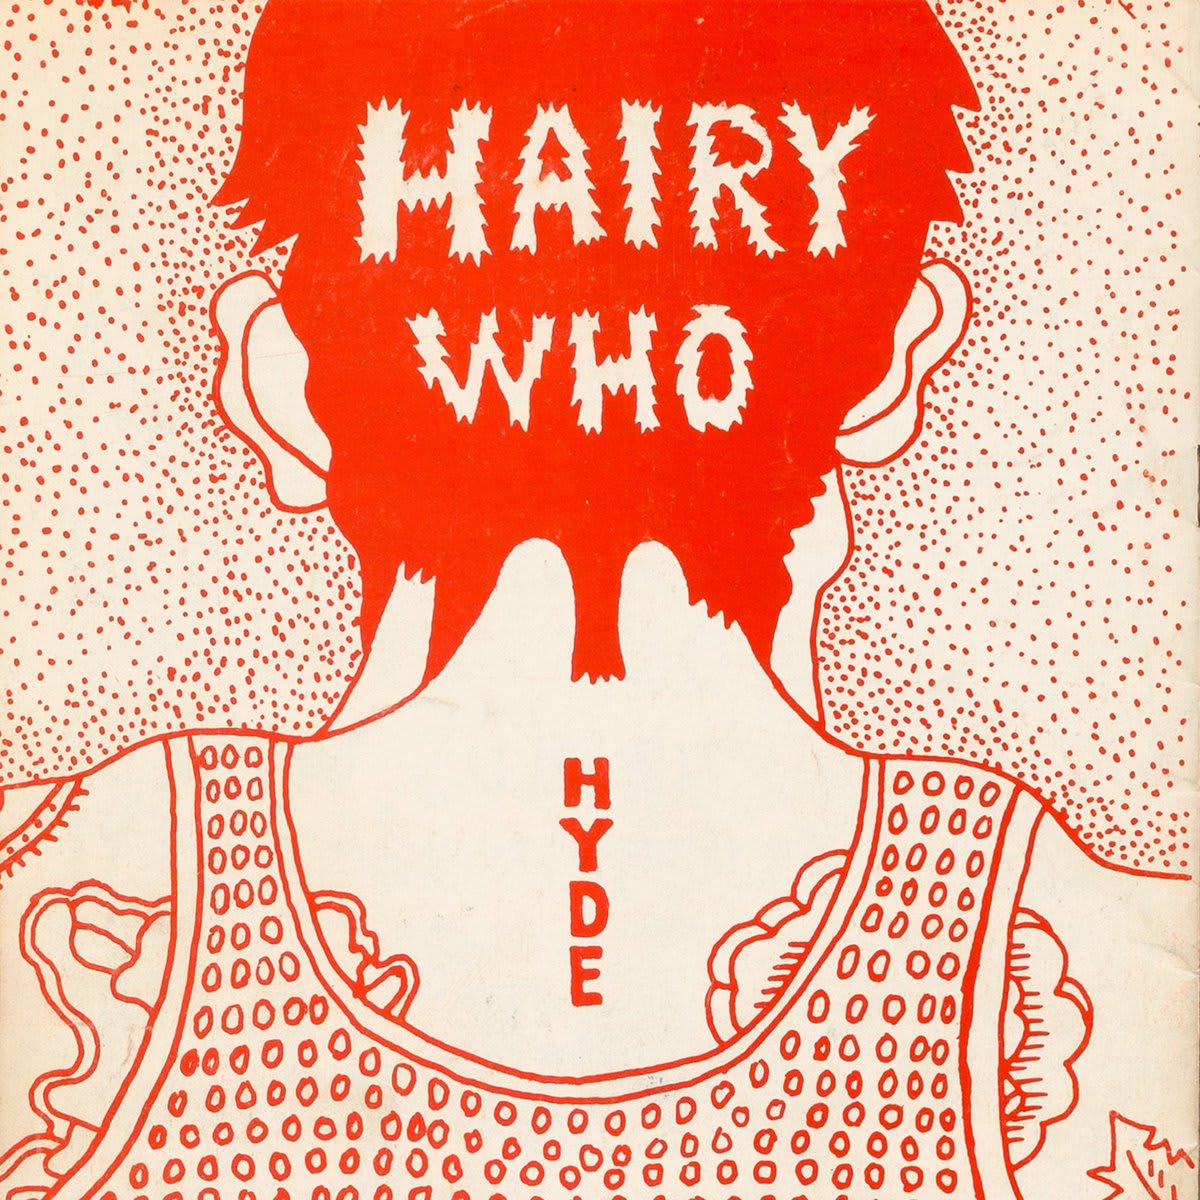 NOVEMBER 1—Lecture: Hairy Who? 1966–1969 Explore the exhibition “Hairy Who? 1966–1969” through artwork and archival finds that highlight the Chicago histories and cultural significance of this group of six Chicago artists. REGISTER—https://t.co/cOfI5hxFh2